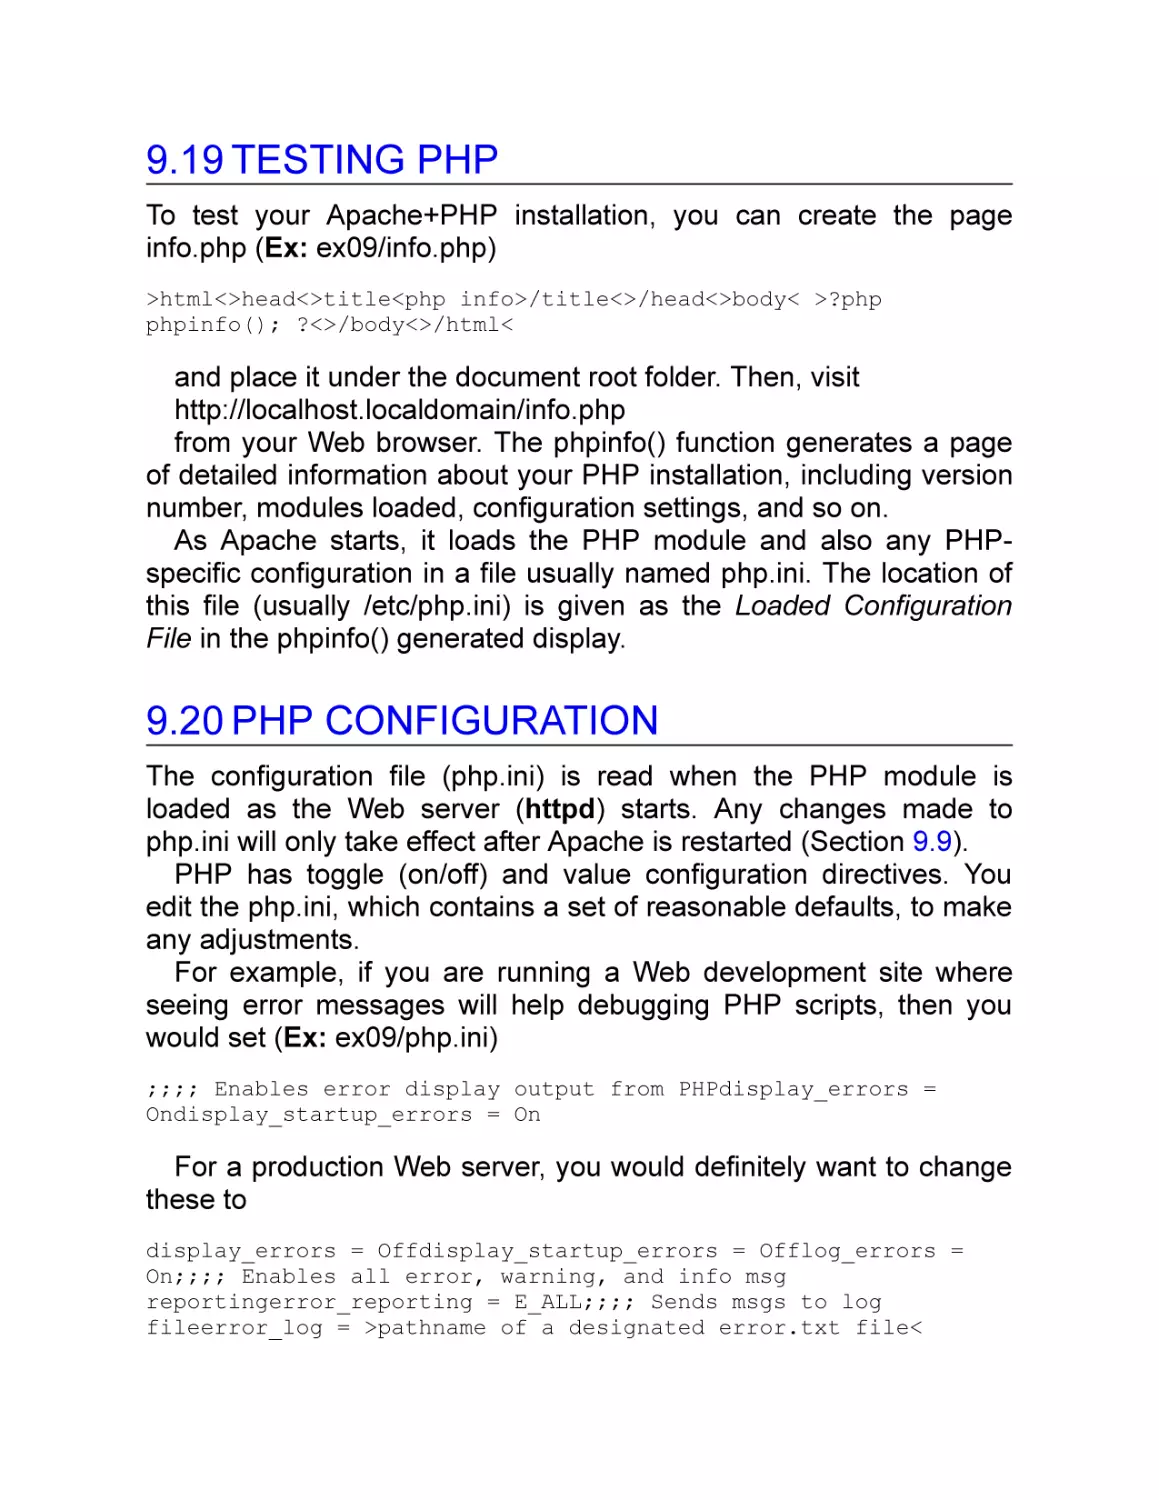 9.19 Testing PHP
9.20 PHP Configuration